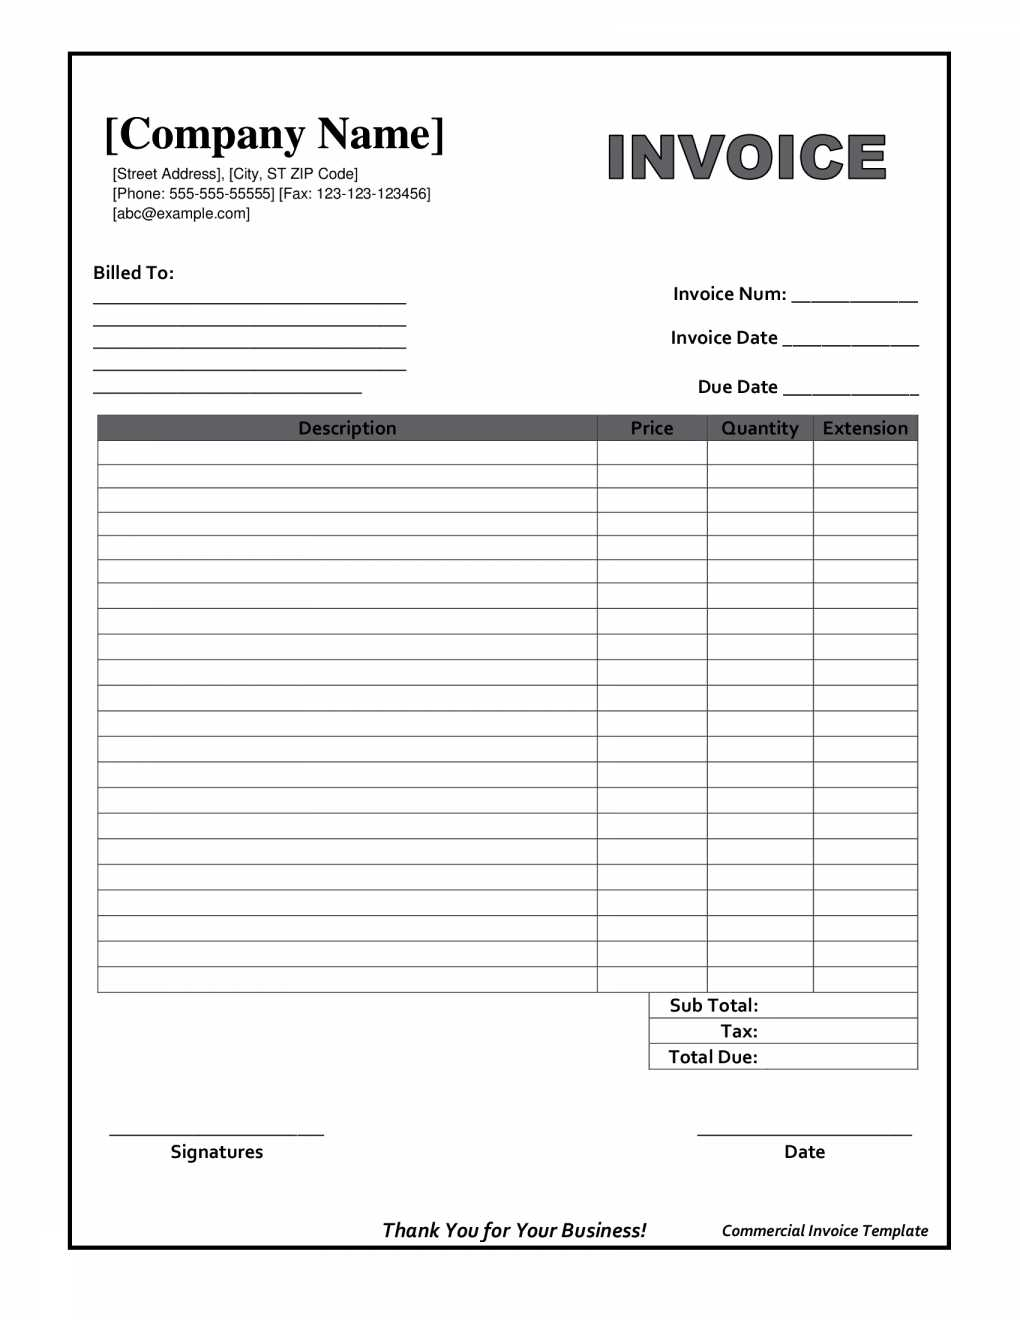 quickbooks invoice printing without lines